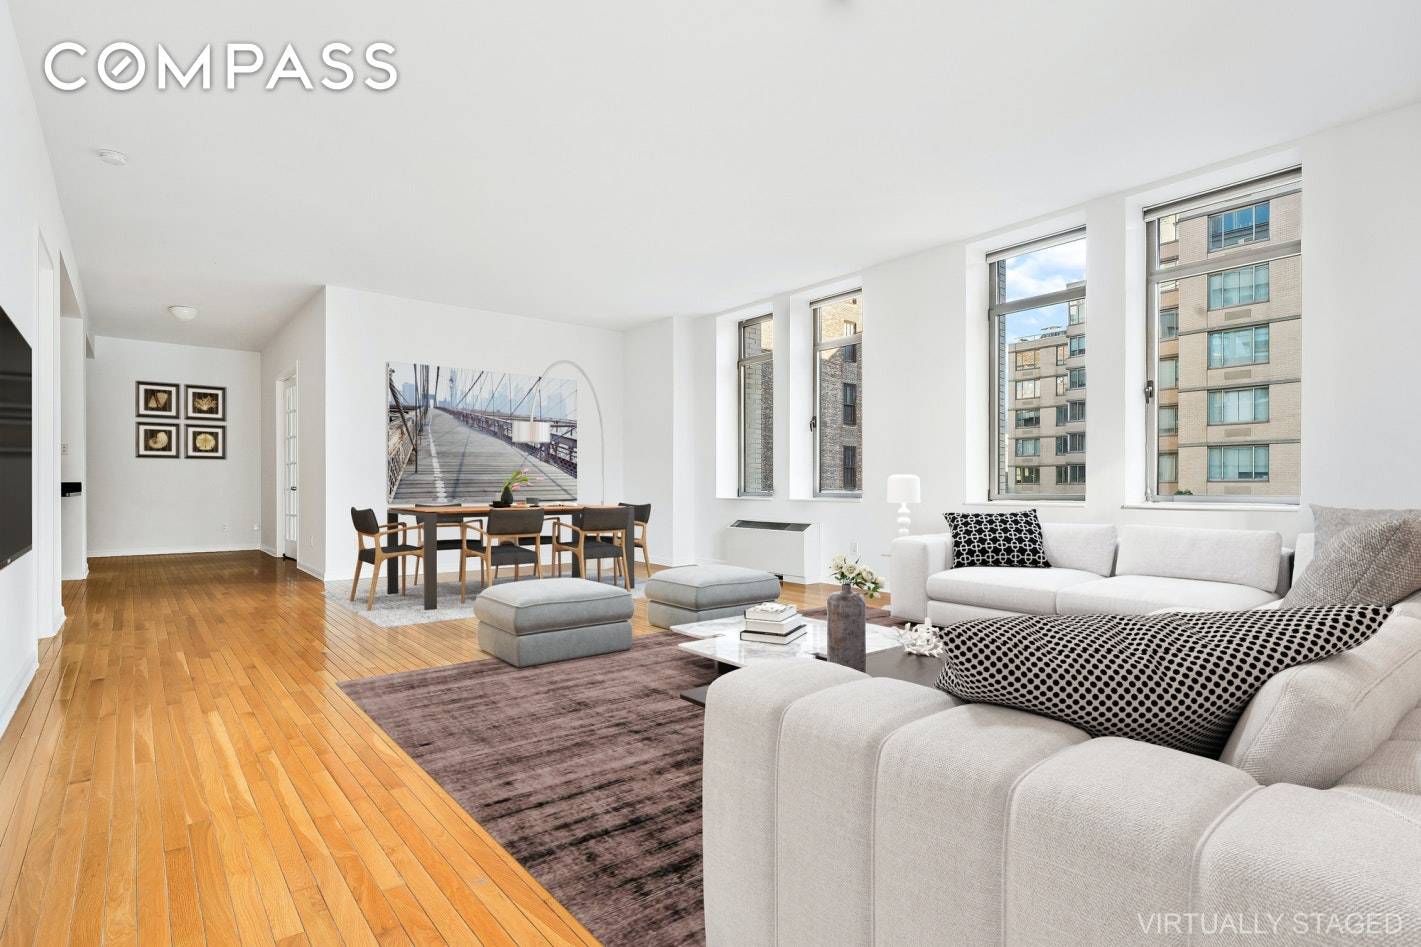 Chelsea chic is beautifully embodied in this expansive 3 bedroom, 3 bath loft apartment with north and east exposures and fabulous city views.